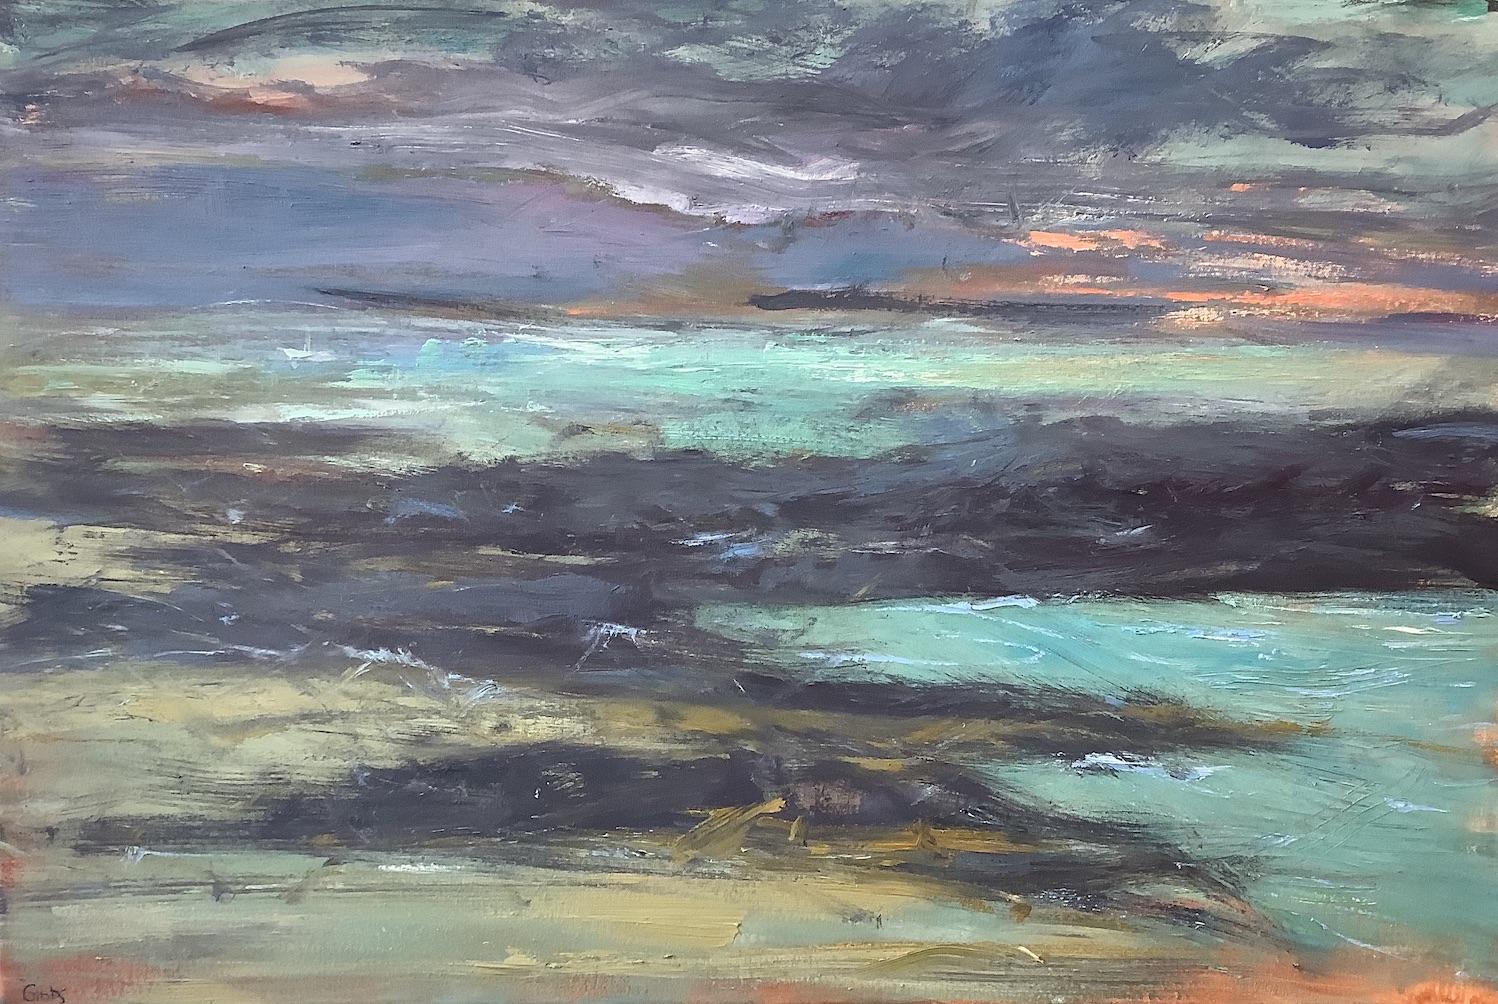 Catherine Picard-Gibbs Landscape Painting - "Dreams of the Shore", abstract, landscape, water, purples, blues, oil painting